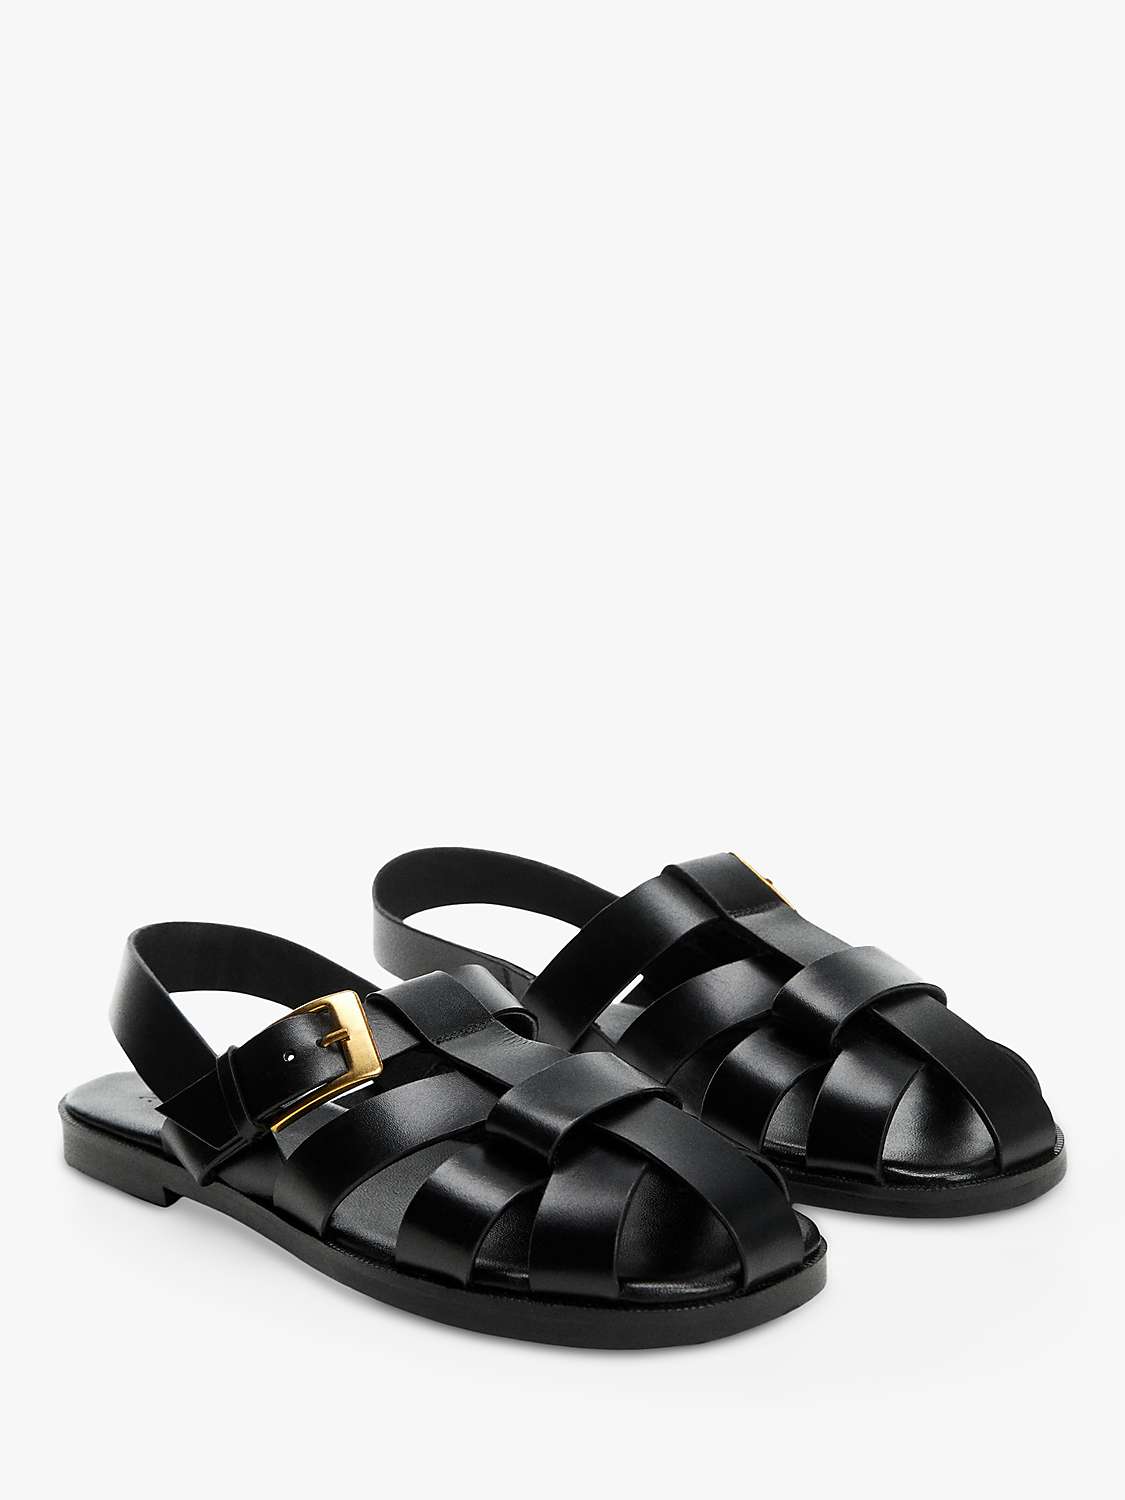 Buy Mango Loraine Leather Jelly Shoes, Black Online at johnlewis.com